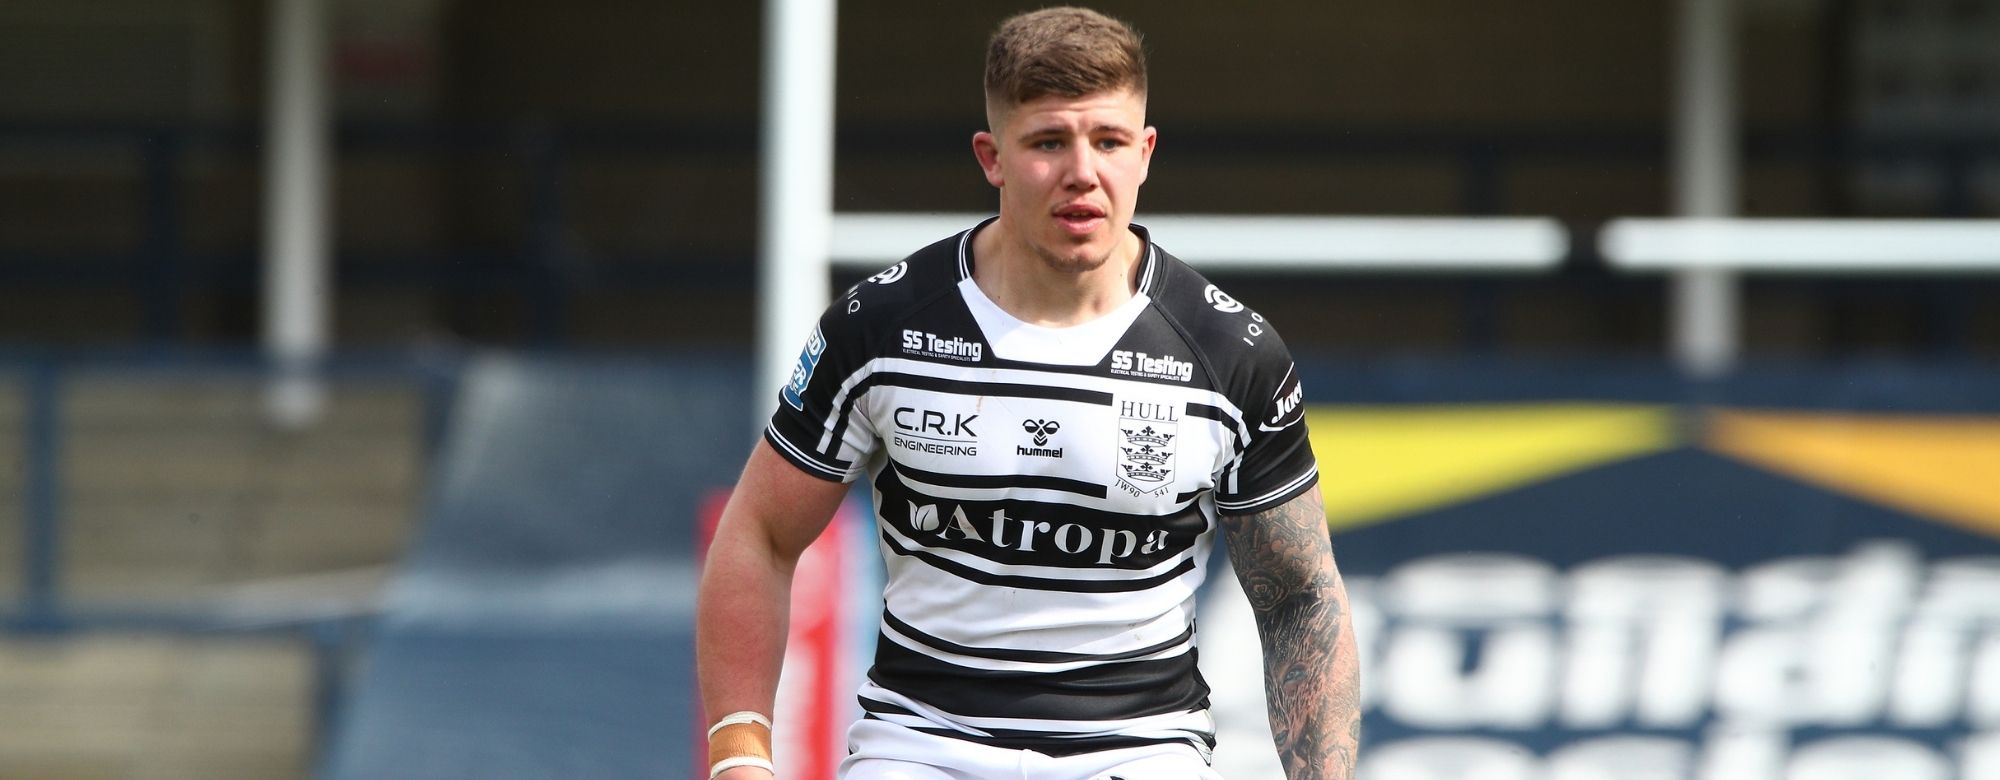 Cator Rewarded With New Deal